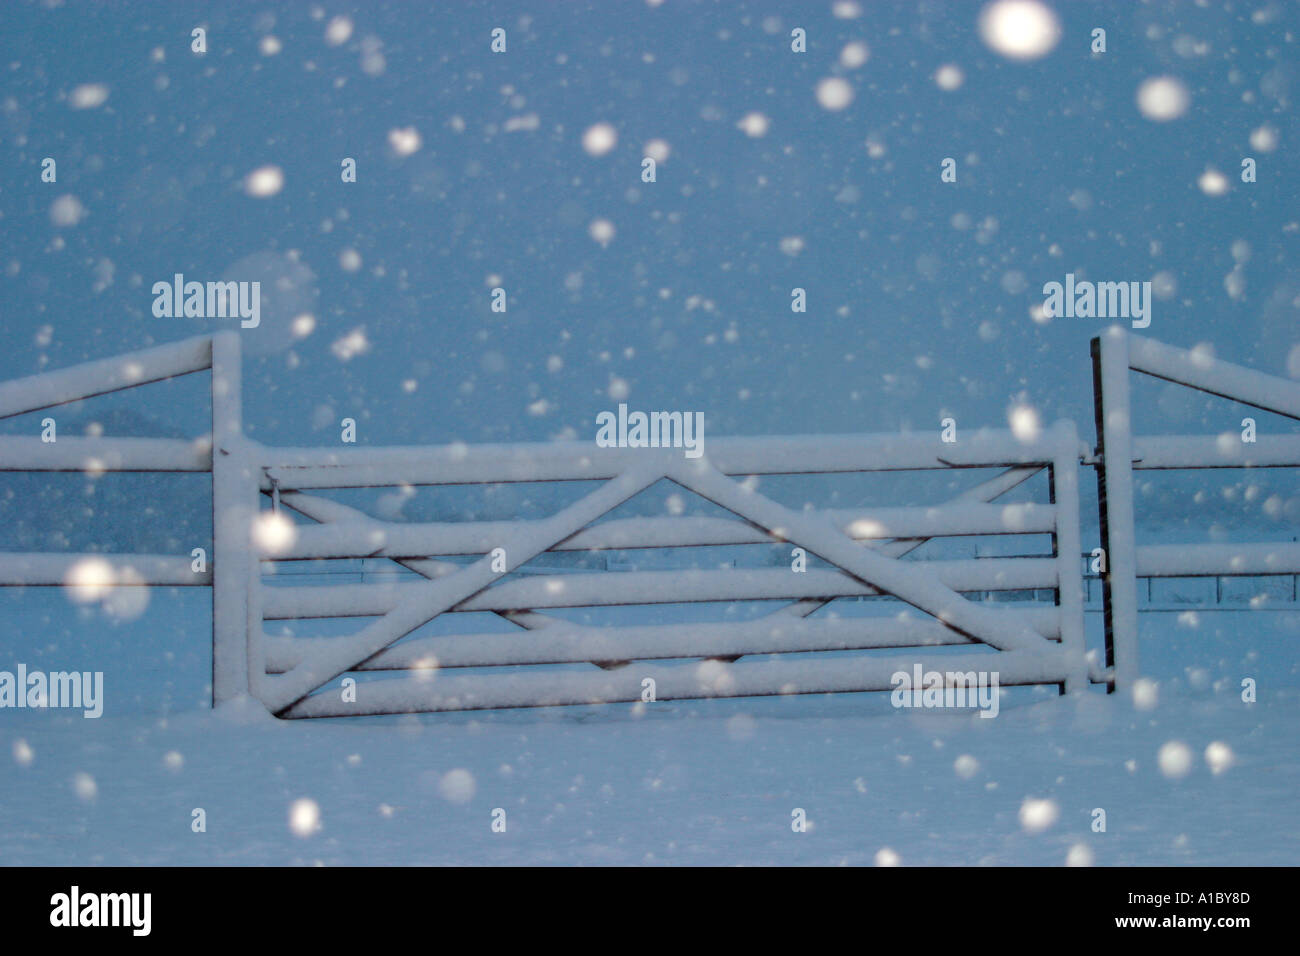 Falling snow caught in flash in front of farm gate Stock Photo